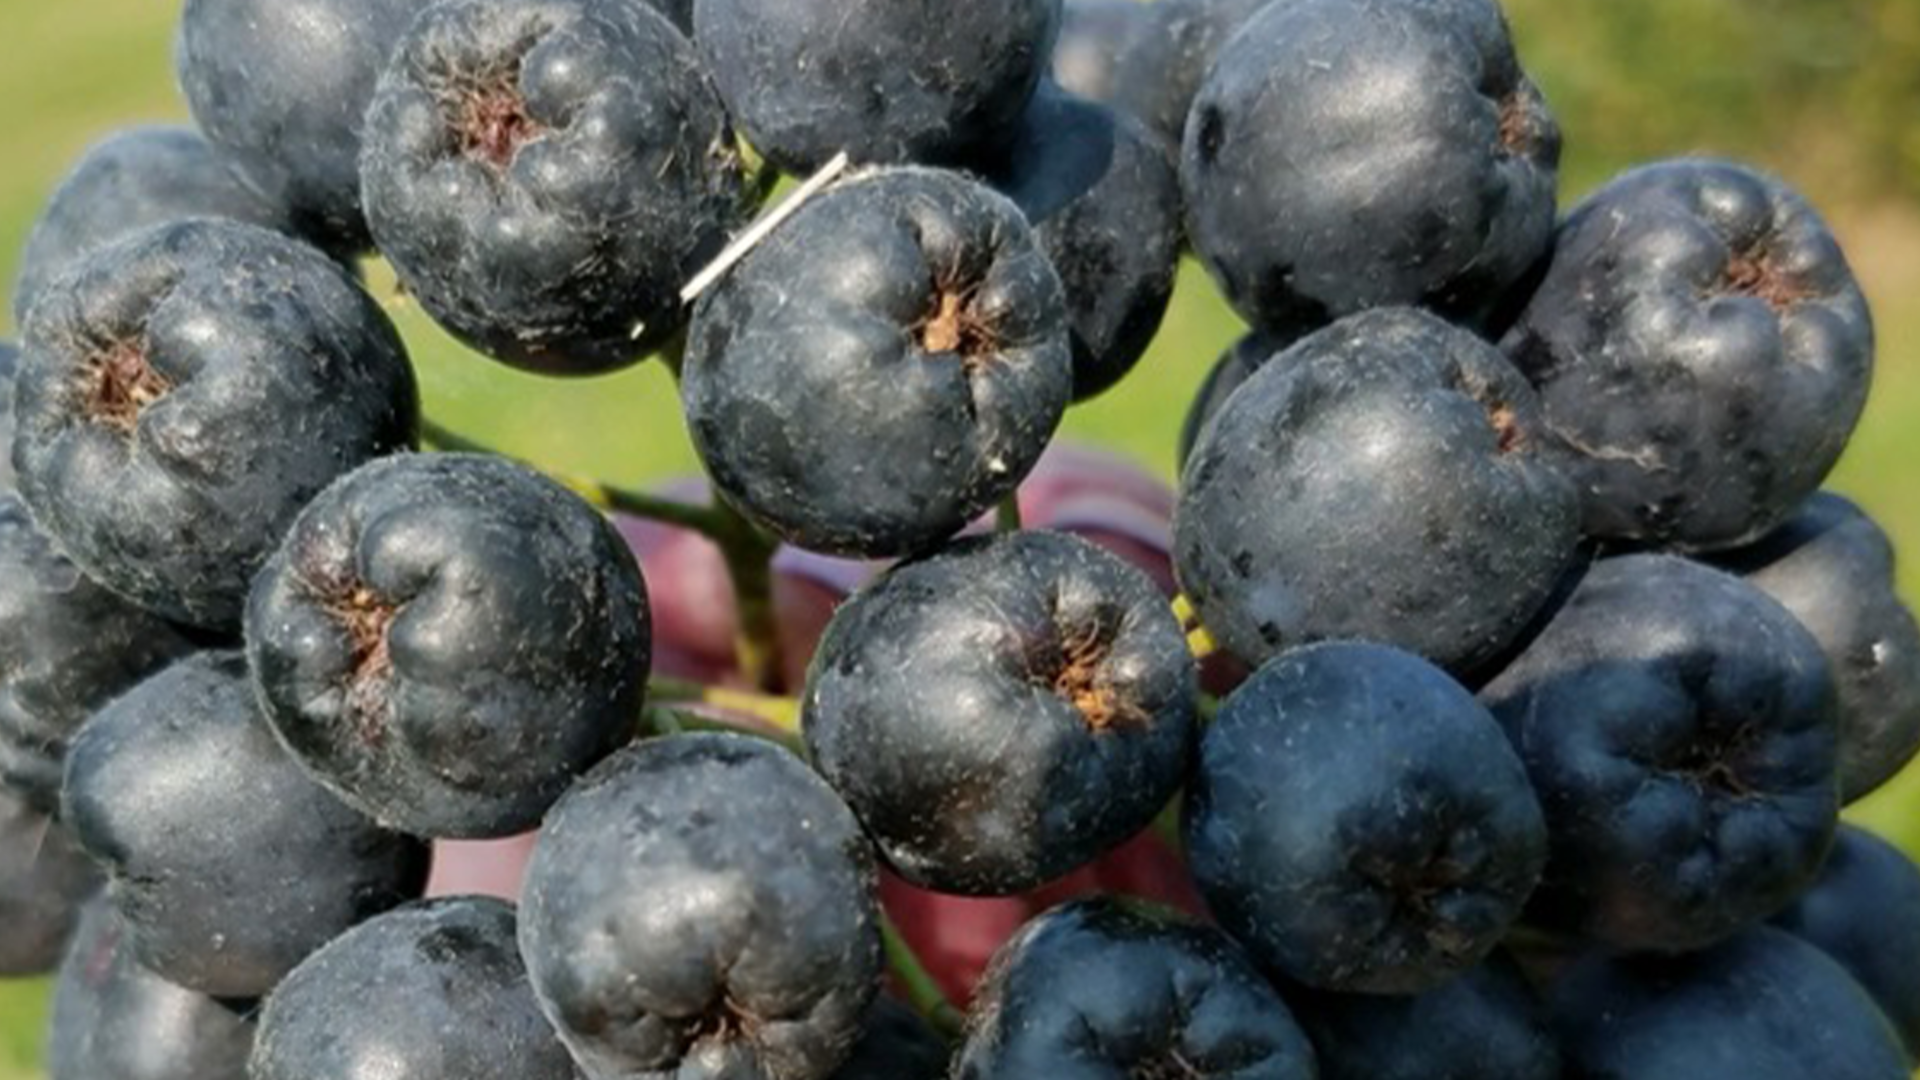 Aronia Berries New Superfood Rich in Antioxidants